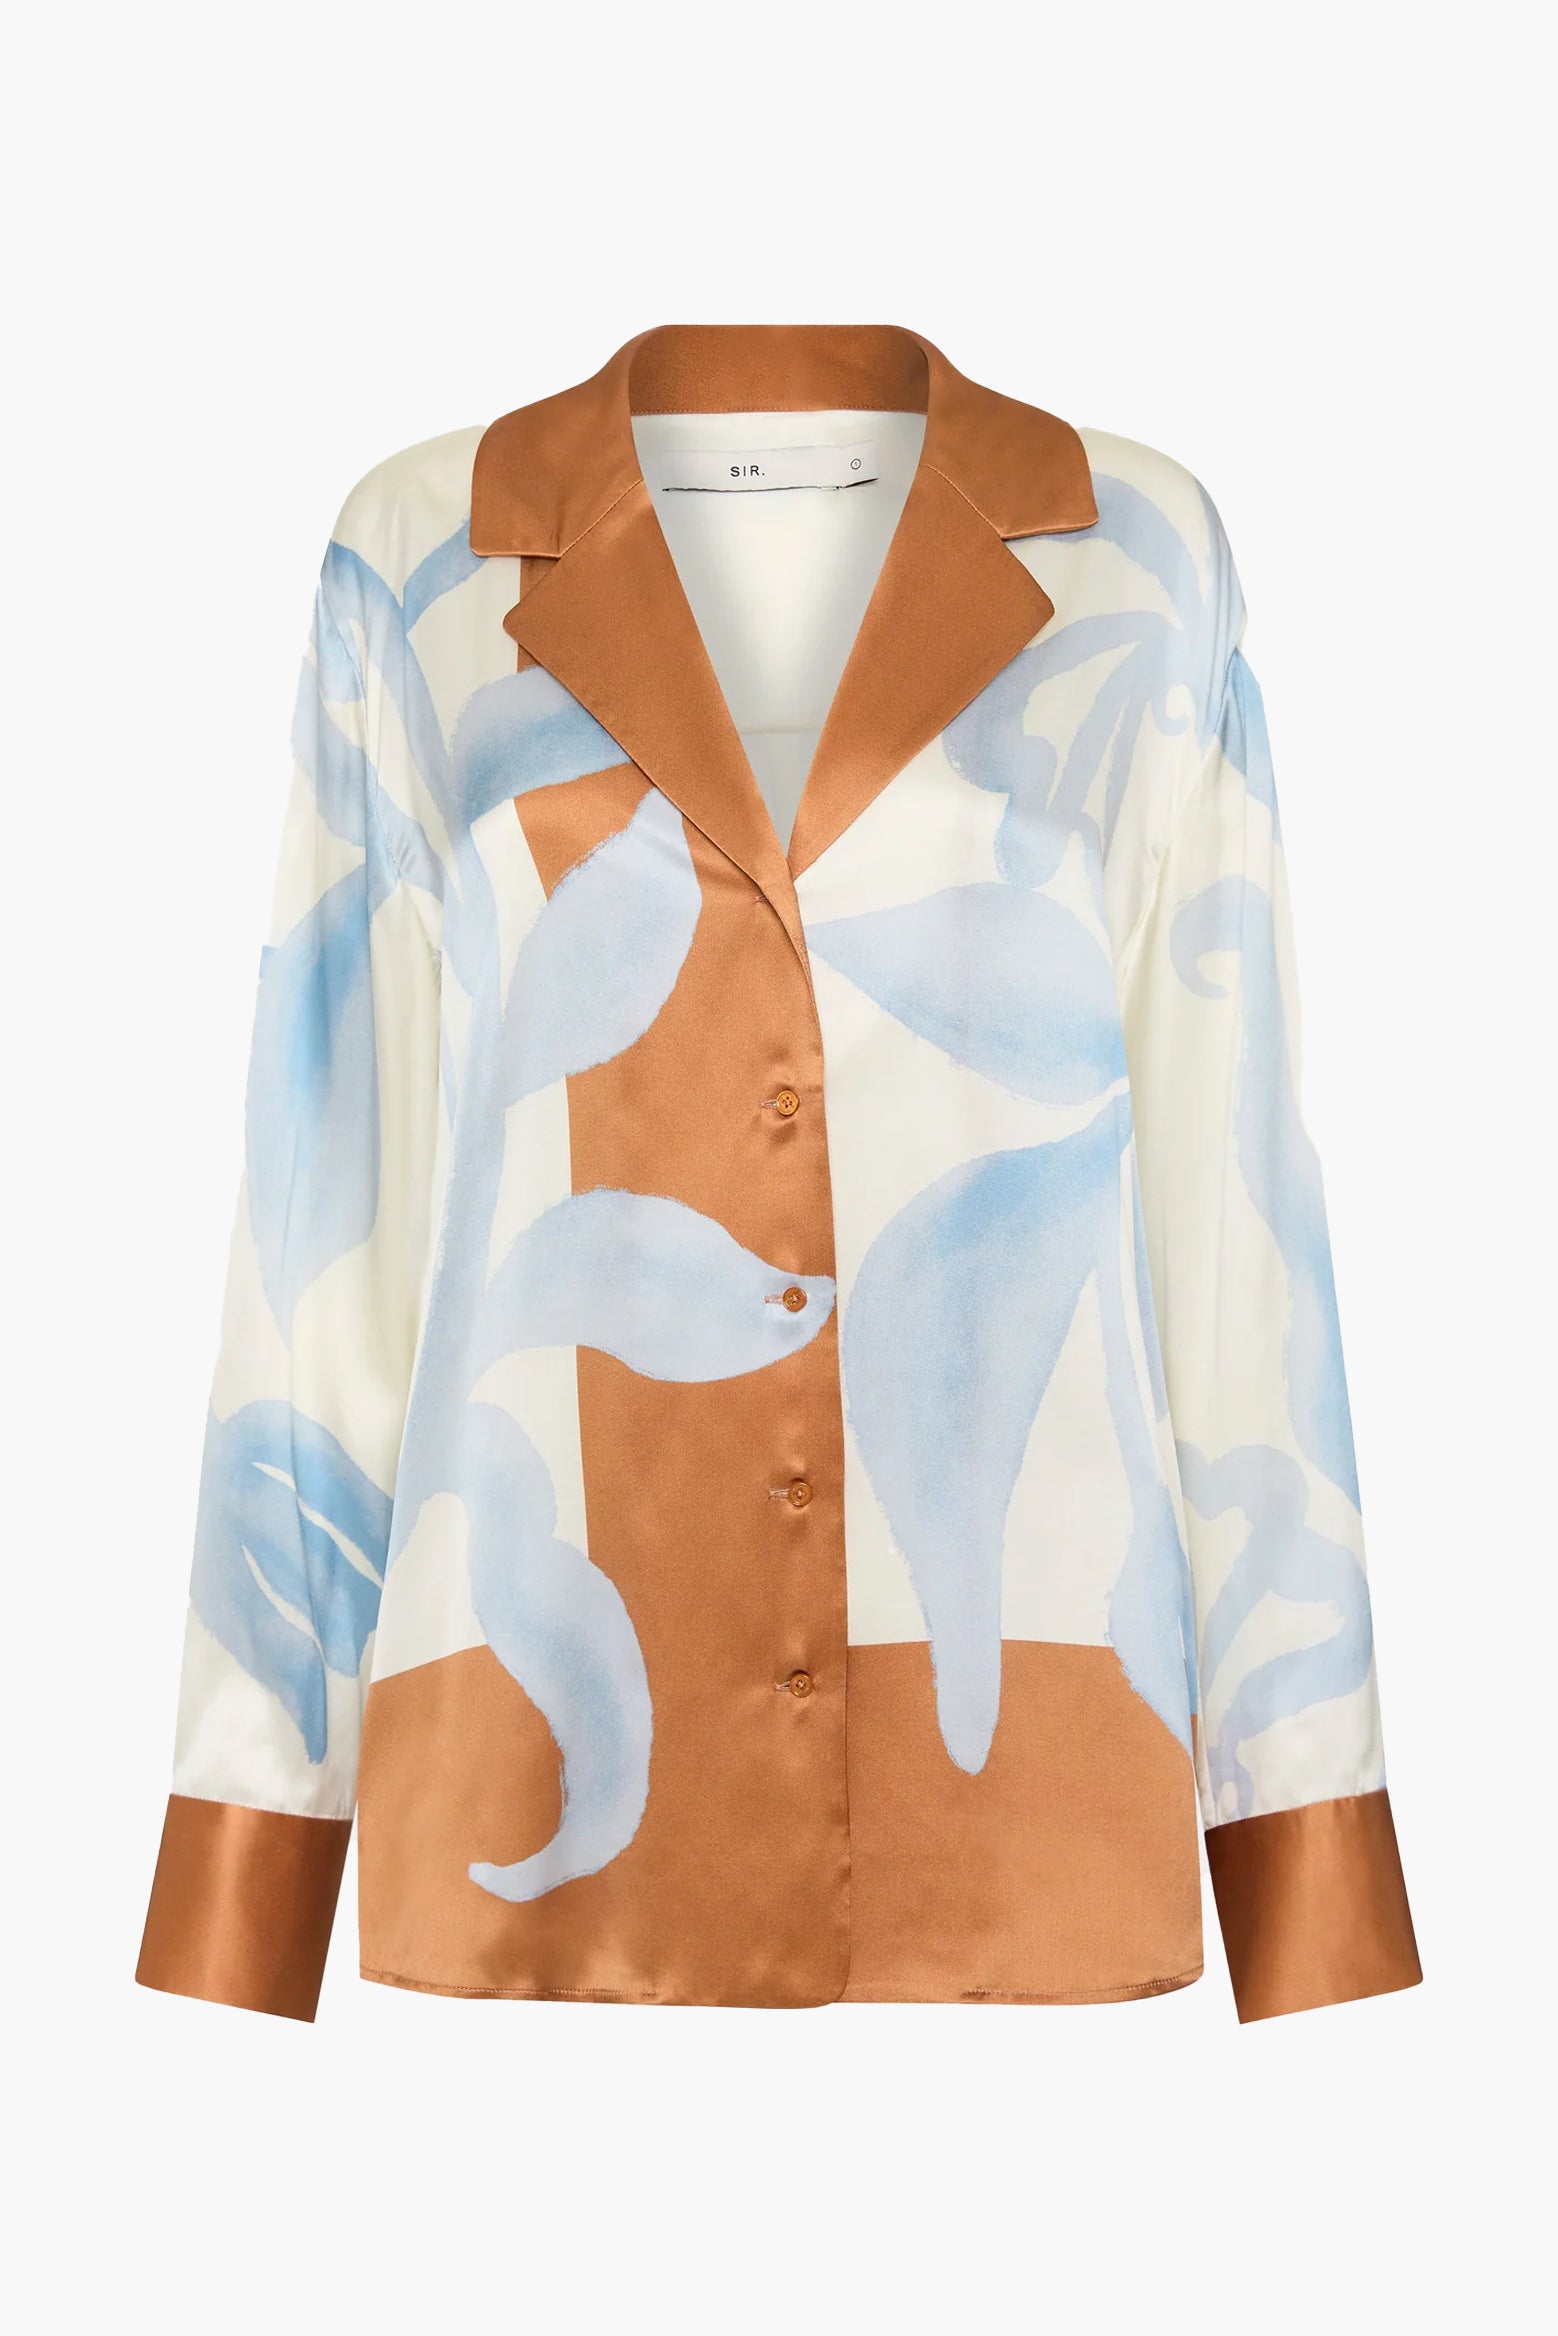 SIR Sorrento Shirt in Sciarpa Print available at The New Trend Australia.